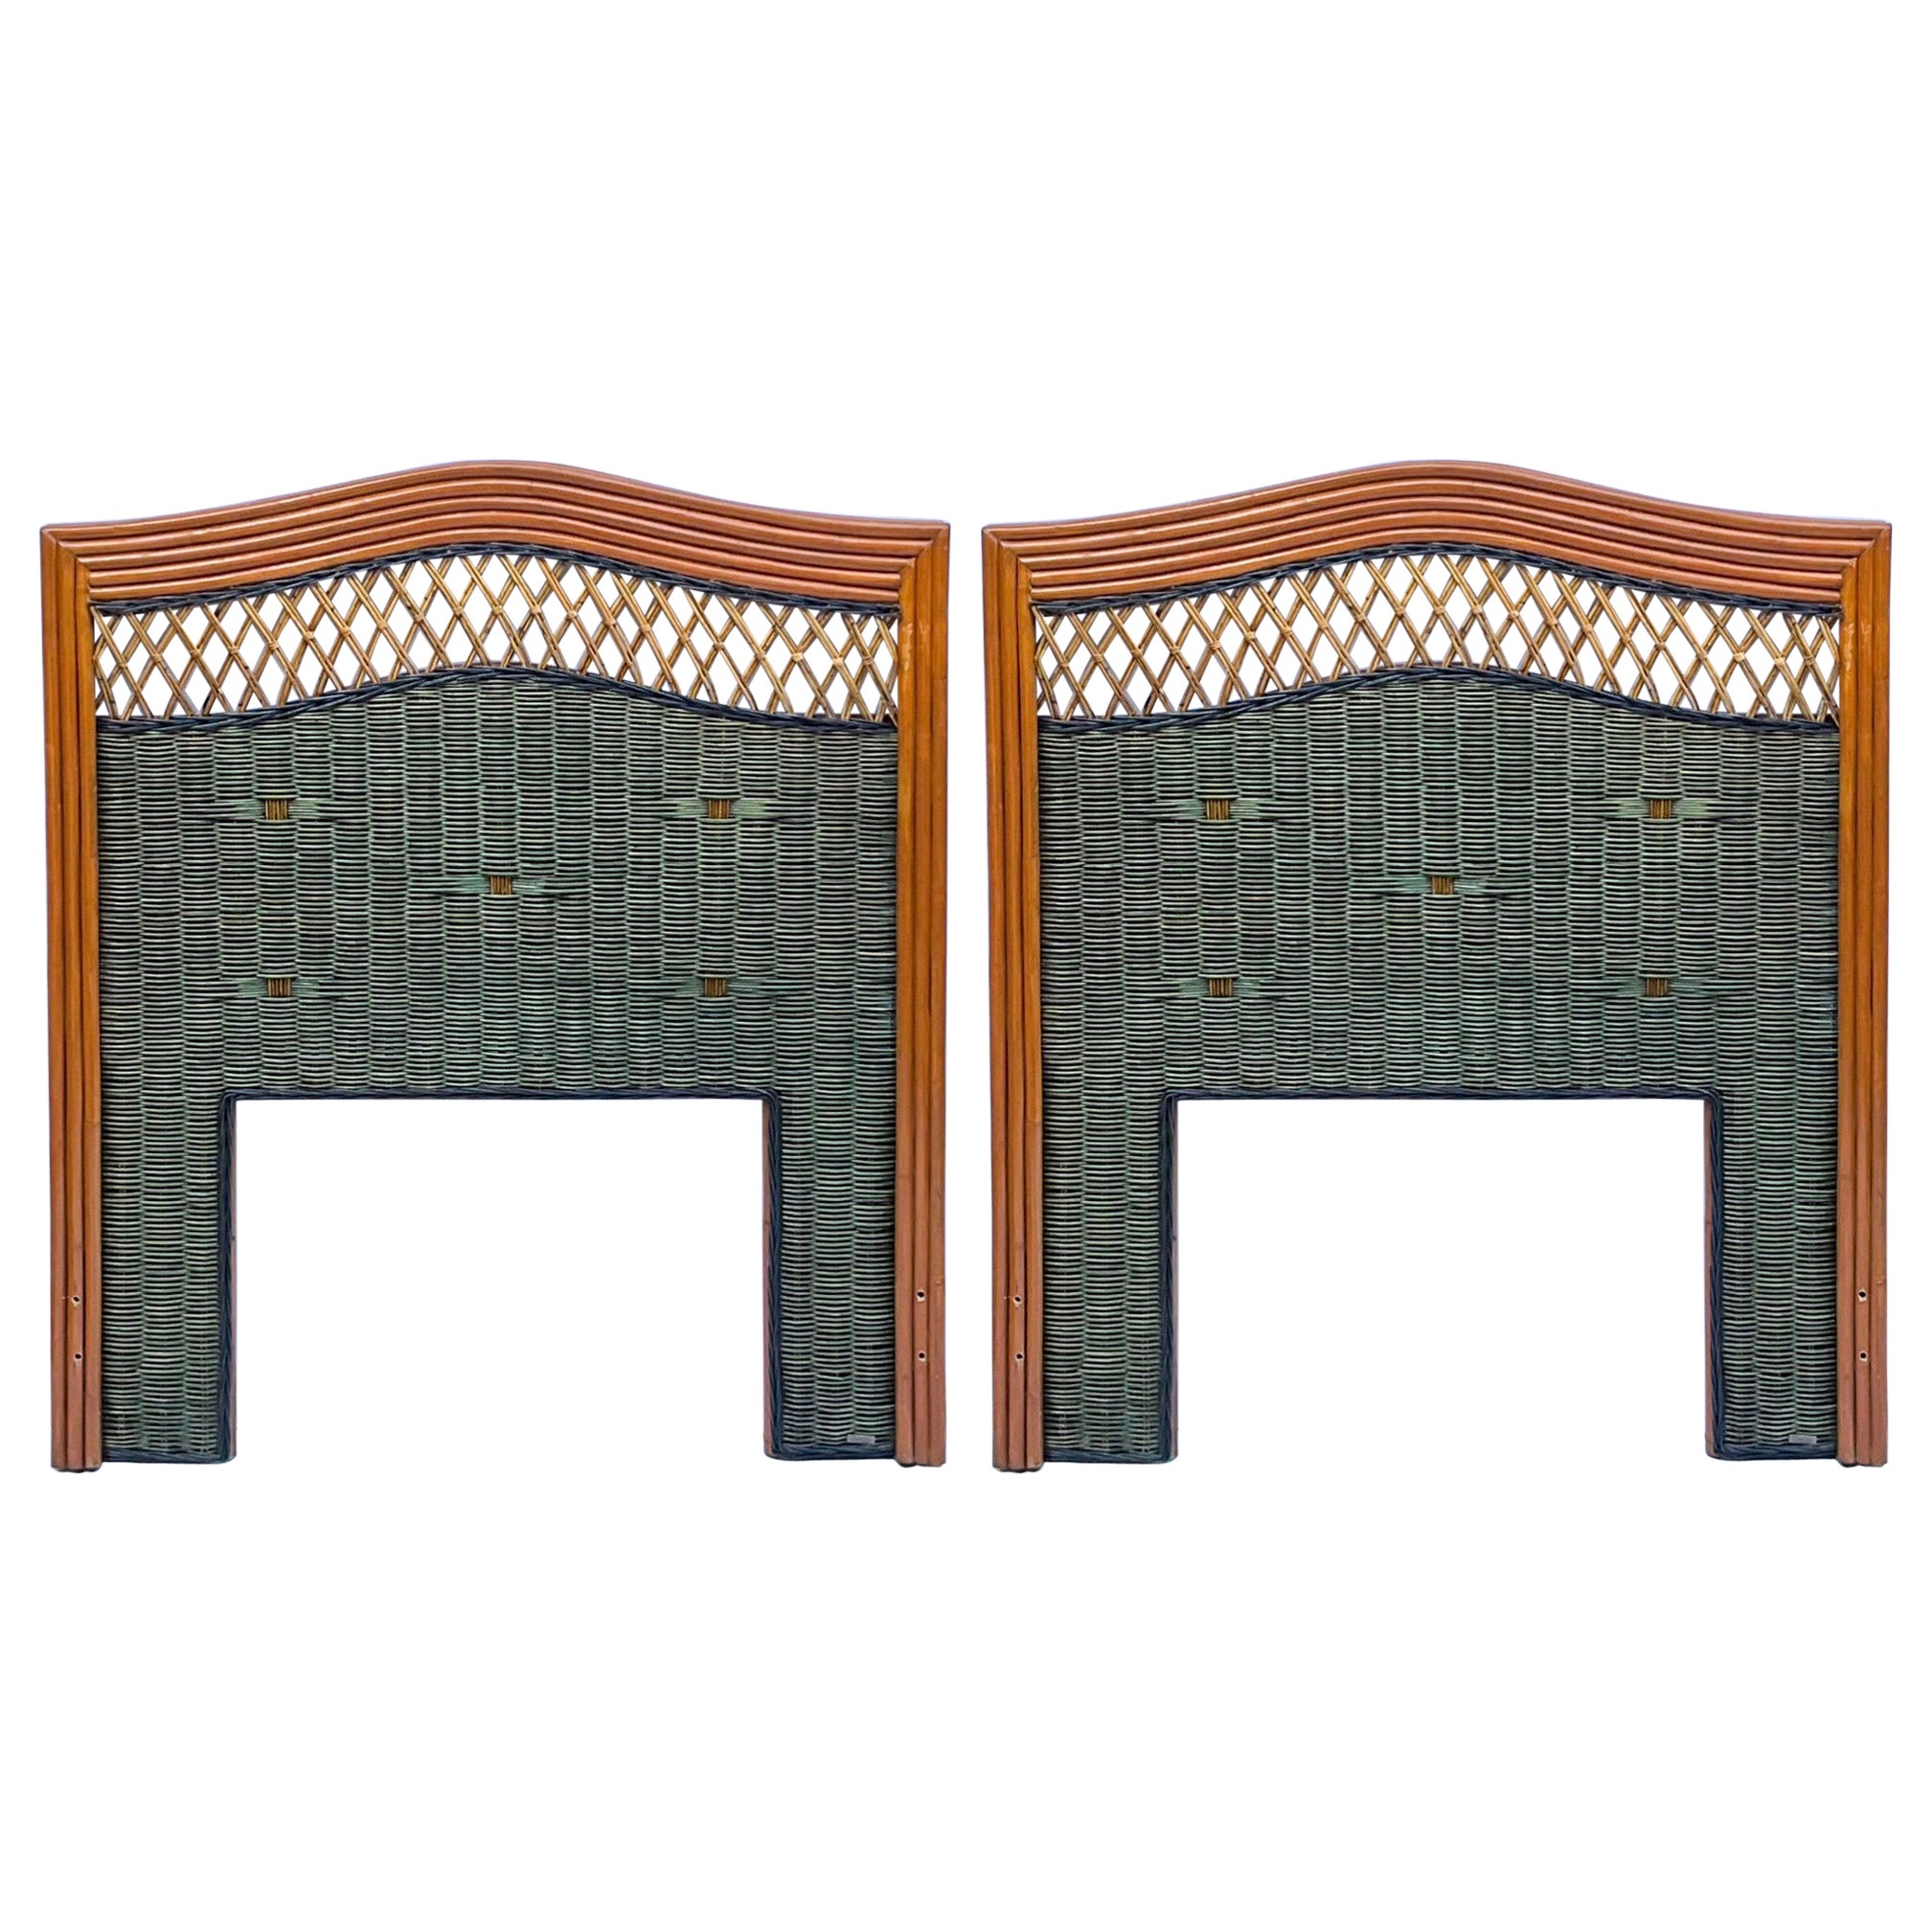 Late 20th-C. French Wicker & Rattan Twin Headboards / Daybed By Grange 